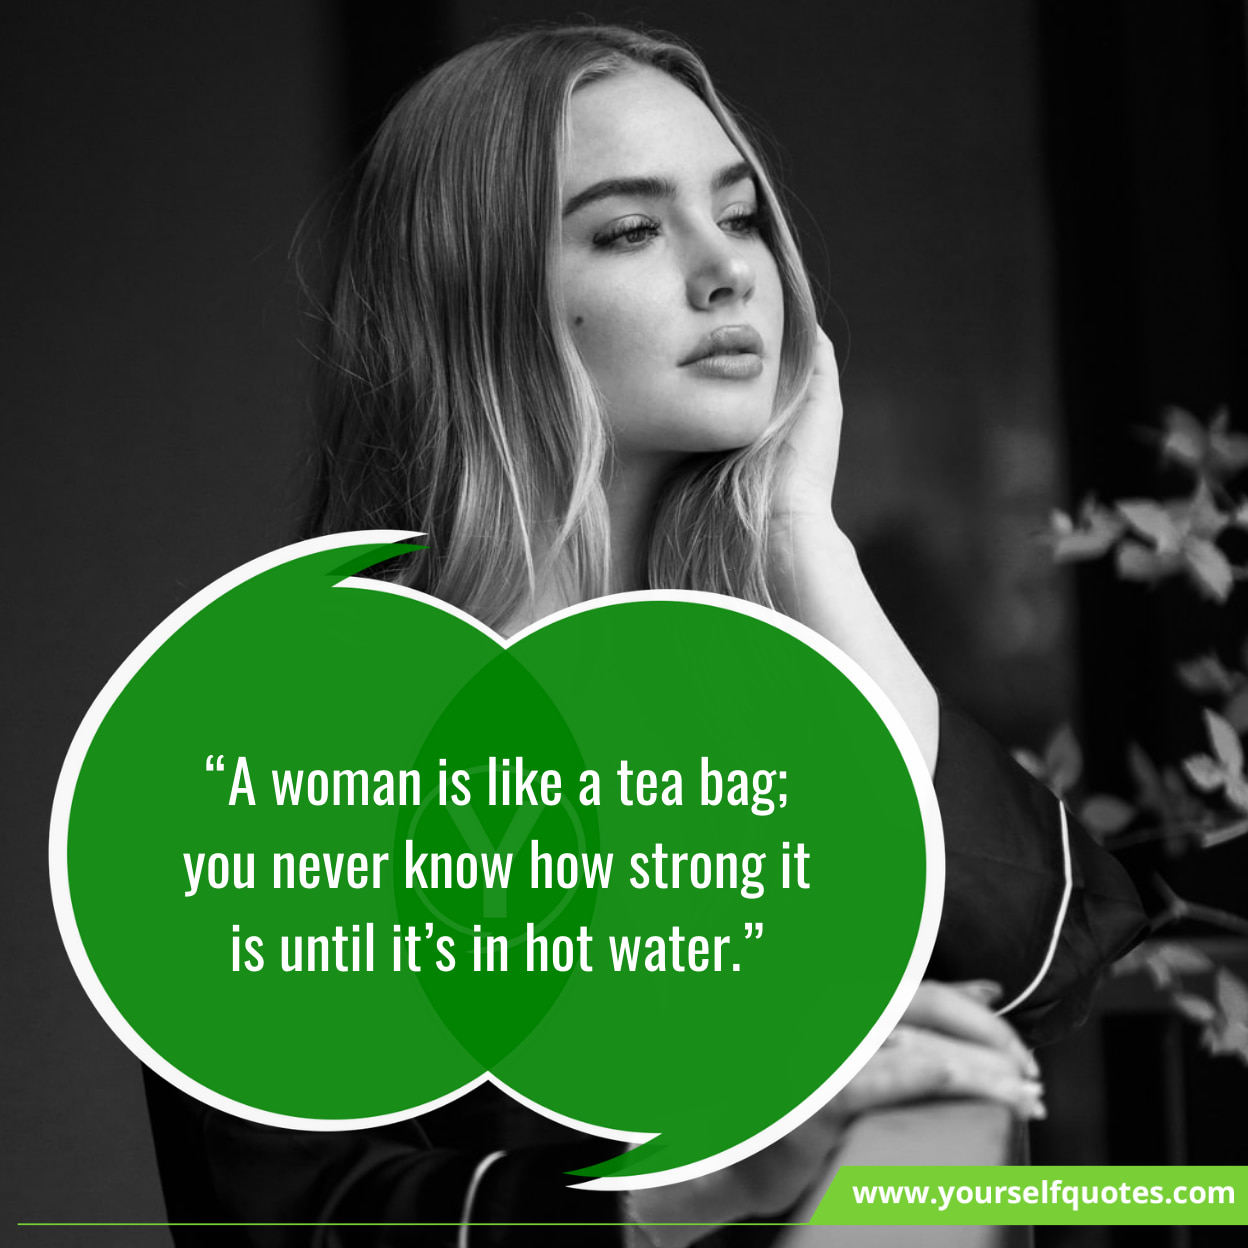 Inspirational Quotes for Women By Famous Women's